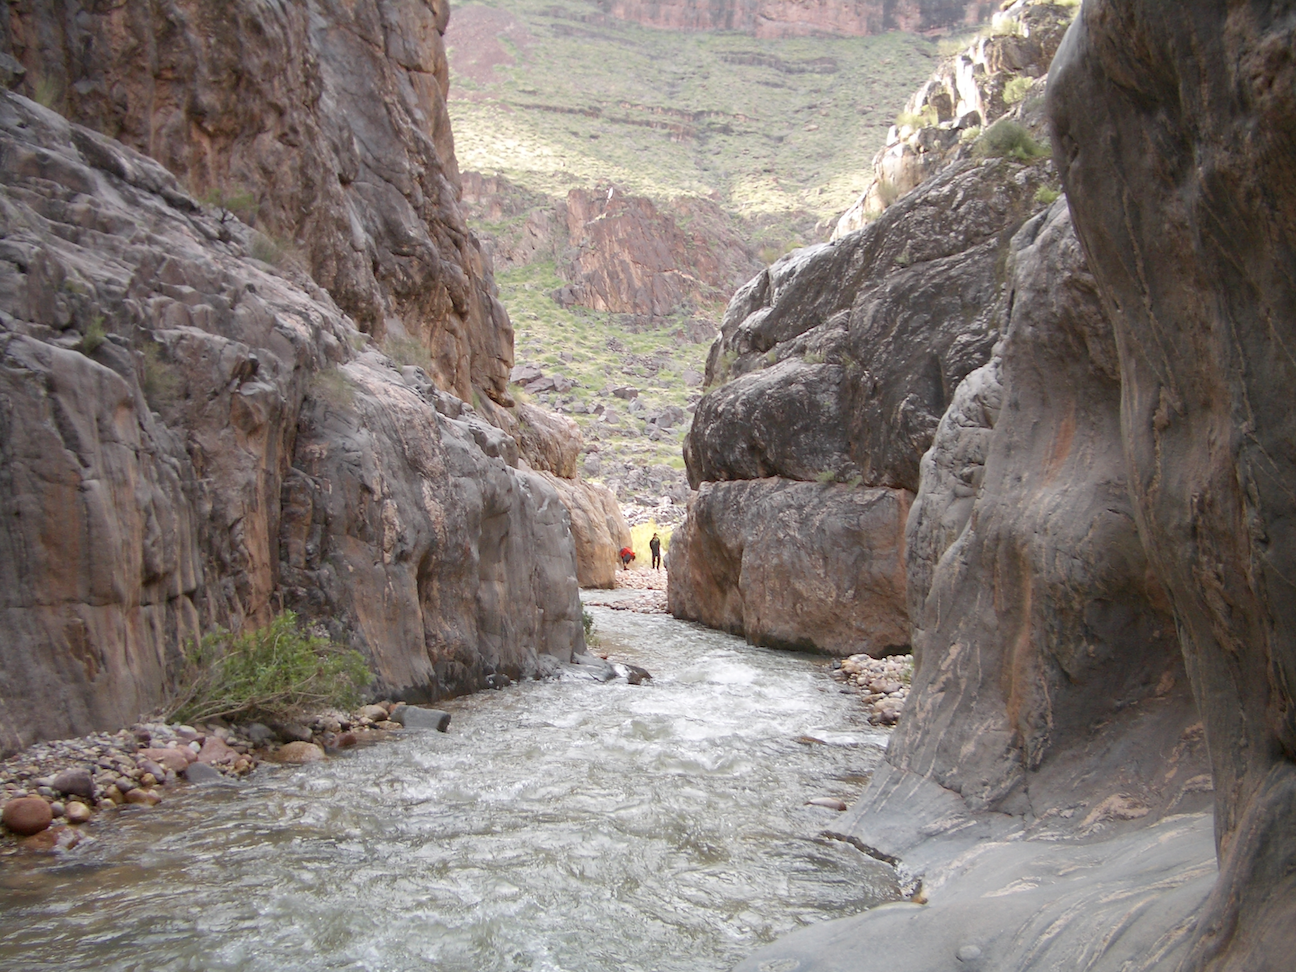 Figure 2. A view of the bedrock walls of Shinumo Creek, looking downstream towards the confluence with the Colorado River (photo C. Hammersmark).